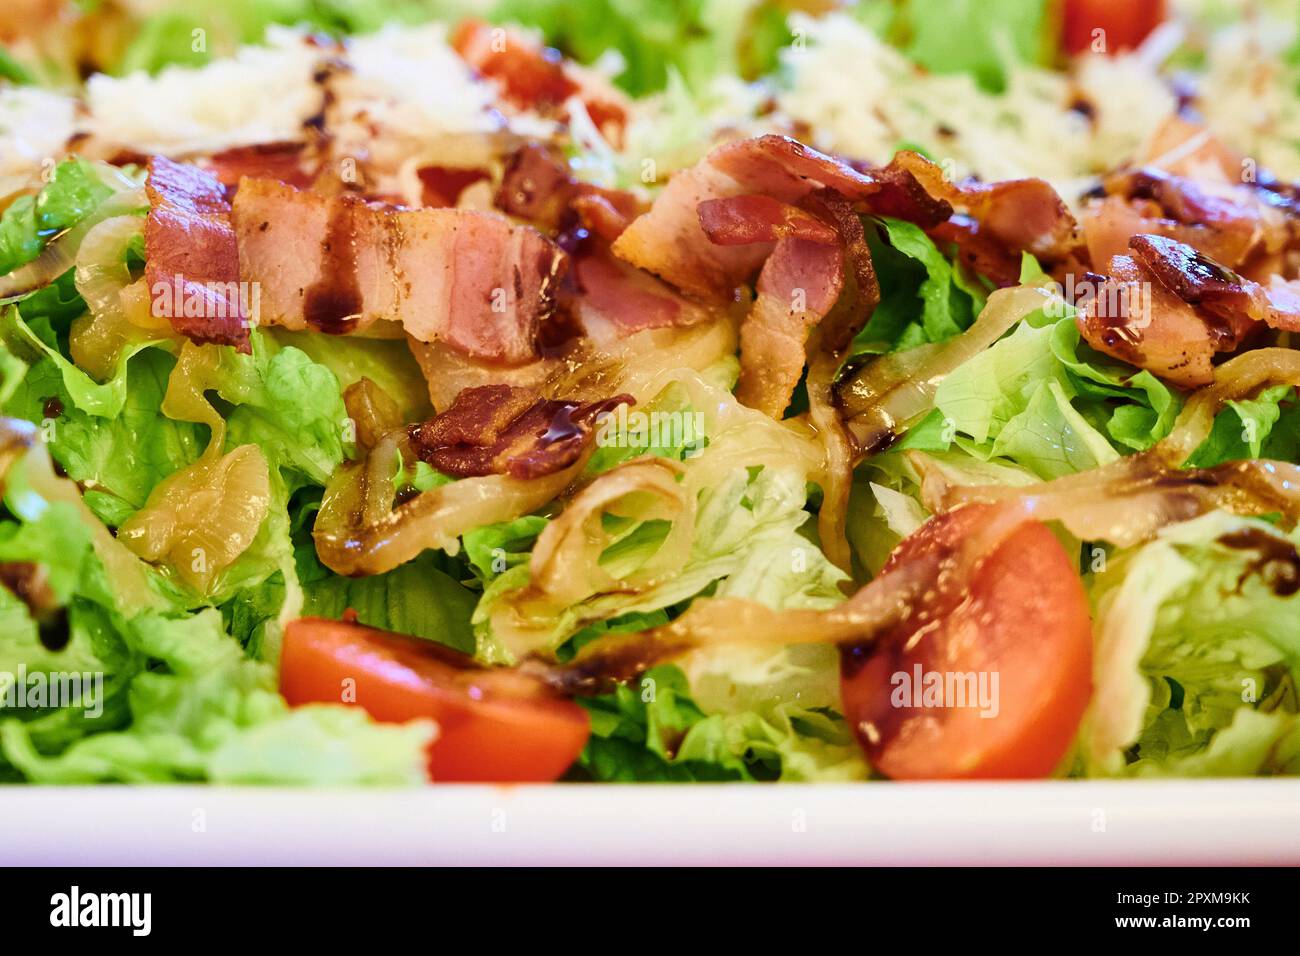 Salad with cheese, bacon, caramelized onion, tomato and lettuce dressed with Modena vinegar Stock Photo